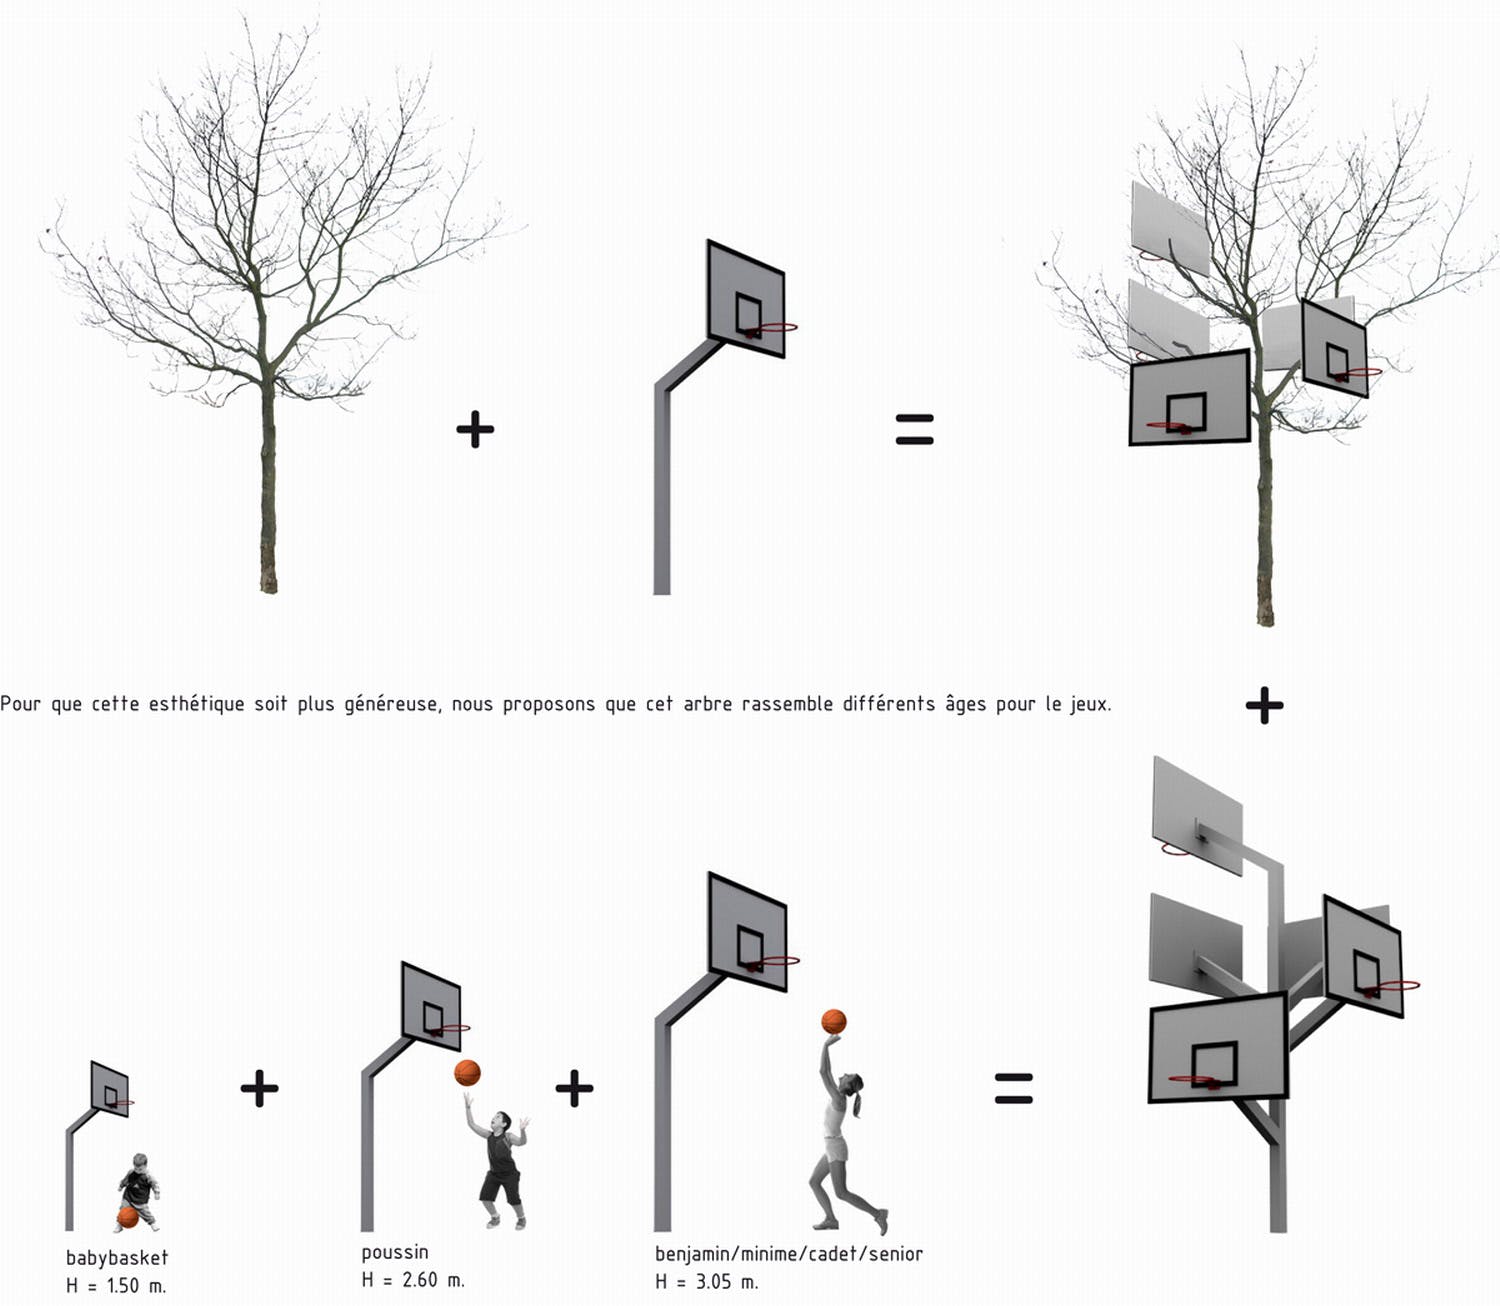 Everyone Can Play Basketball in Arbre 